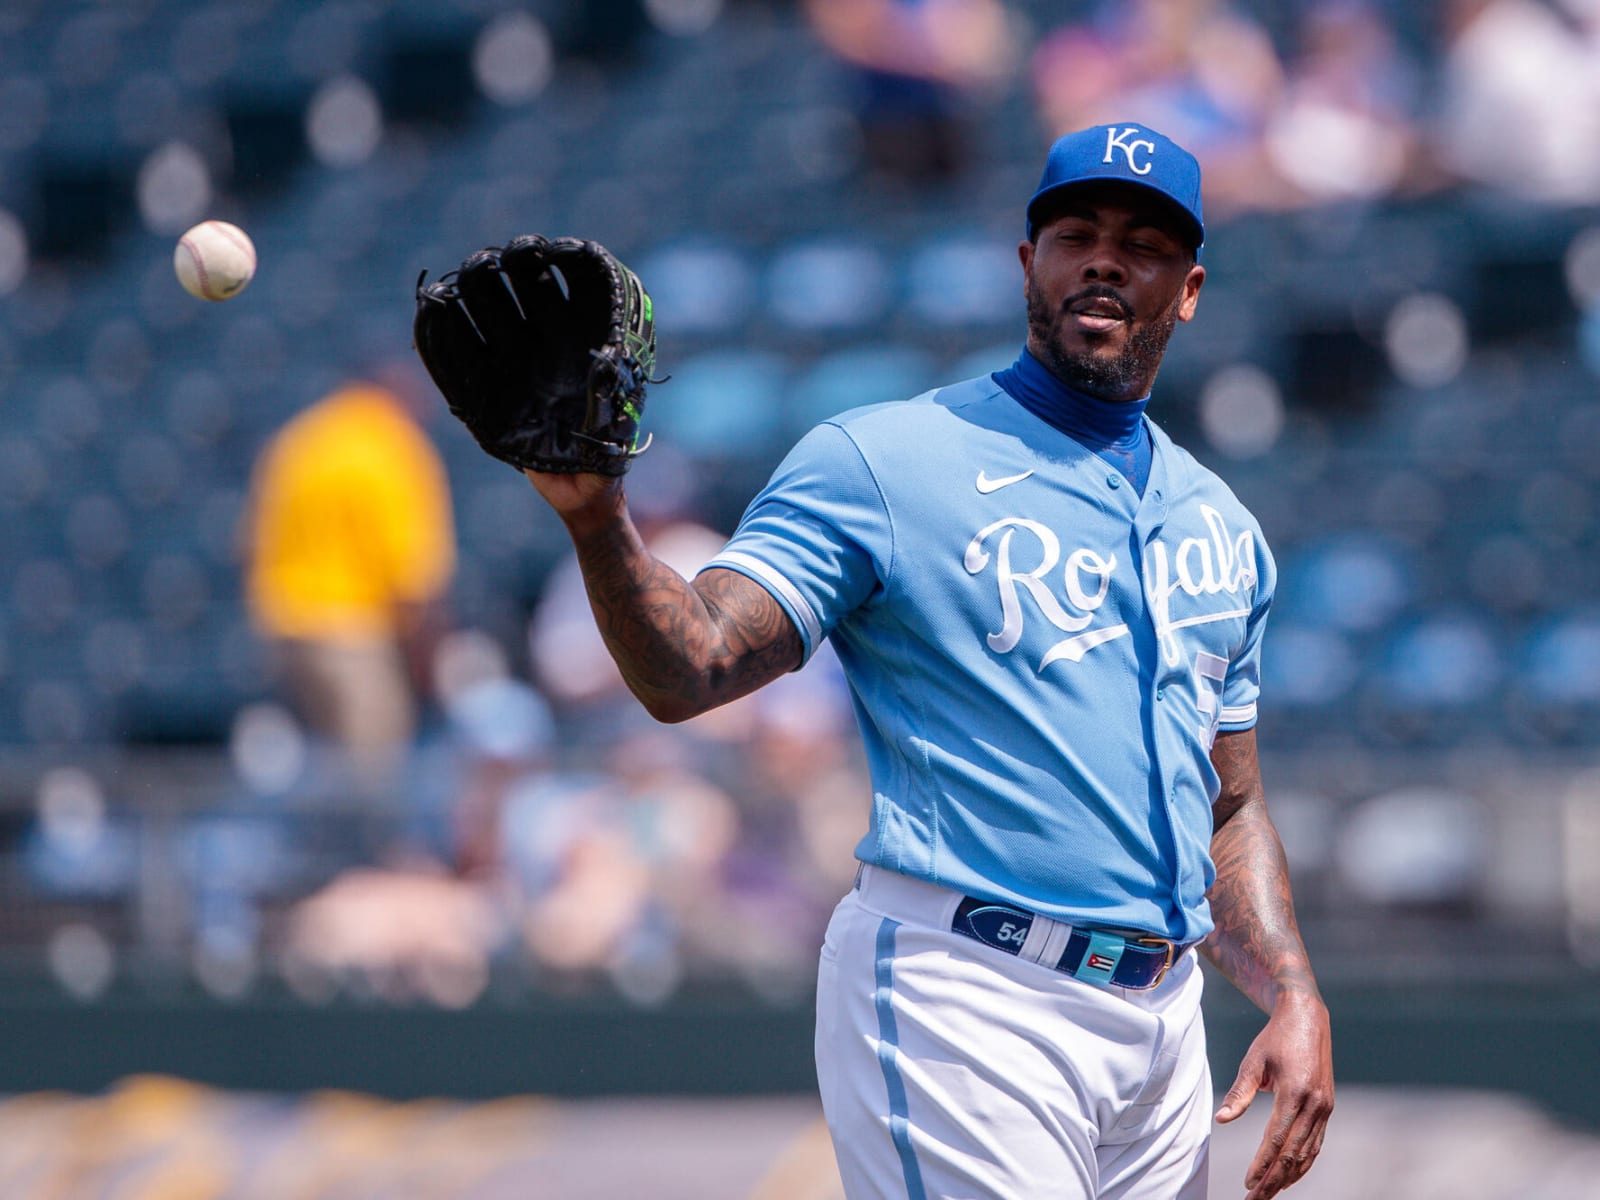 Chapman offers little value after trade to Rangers